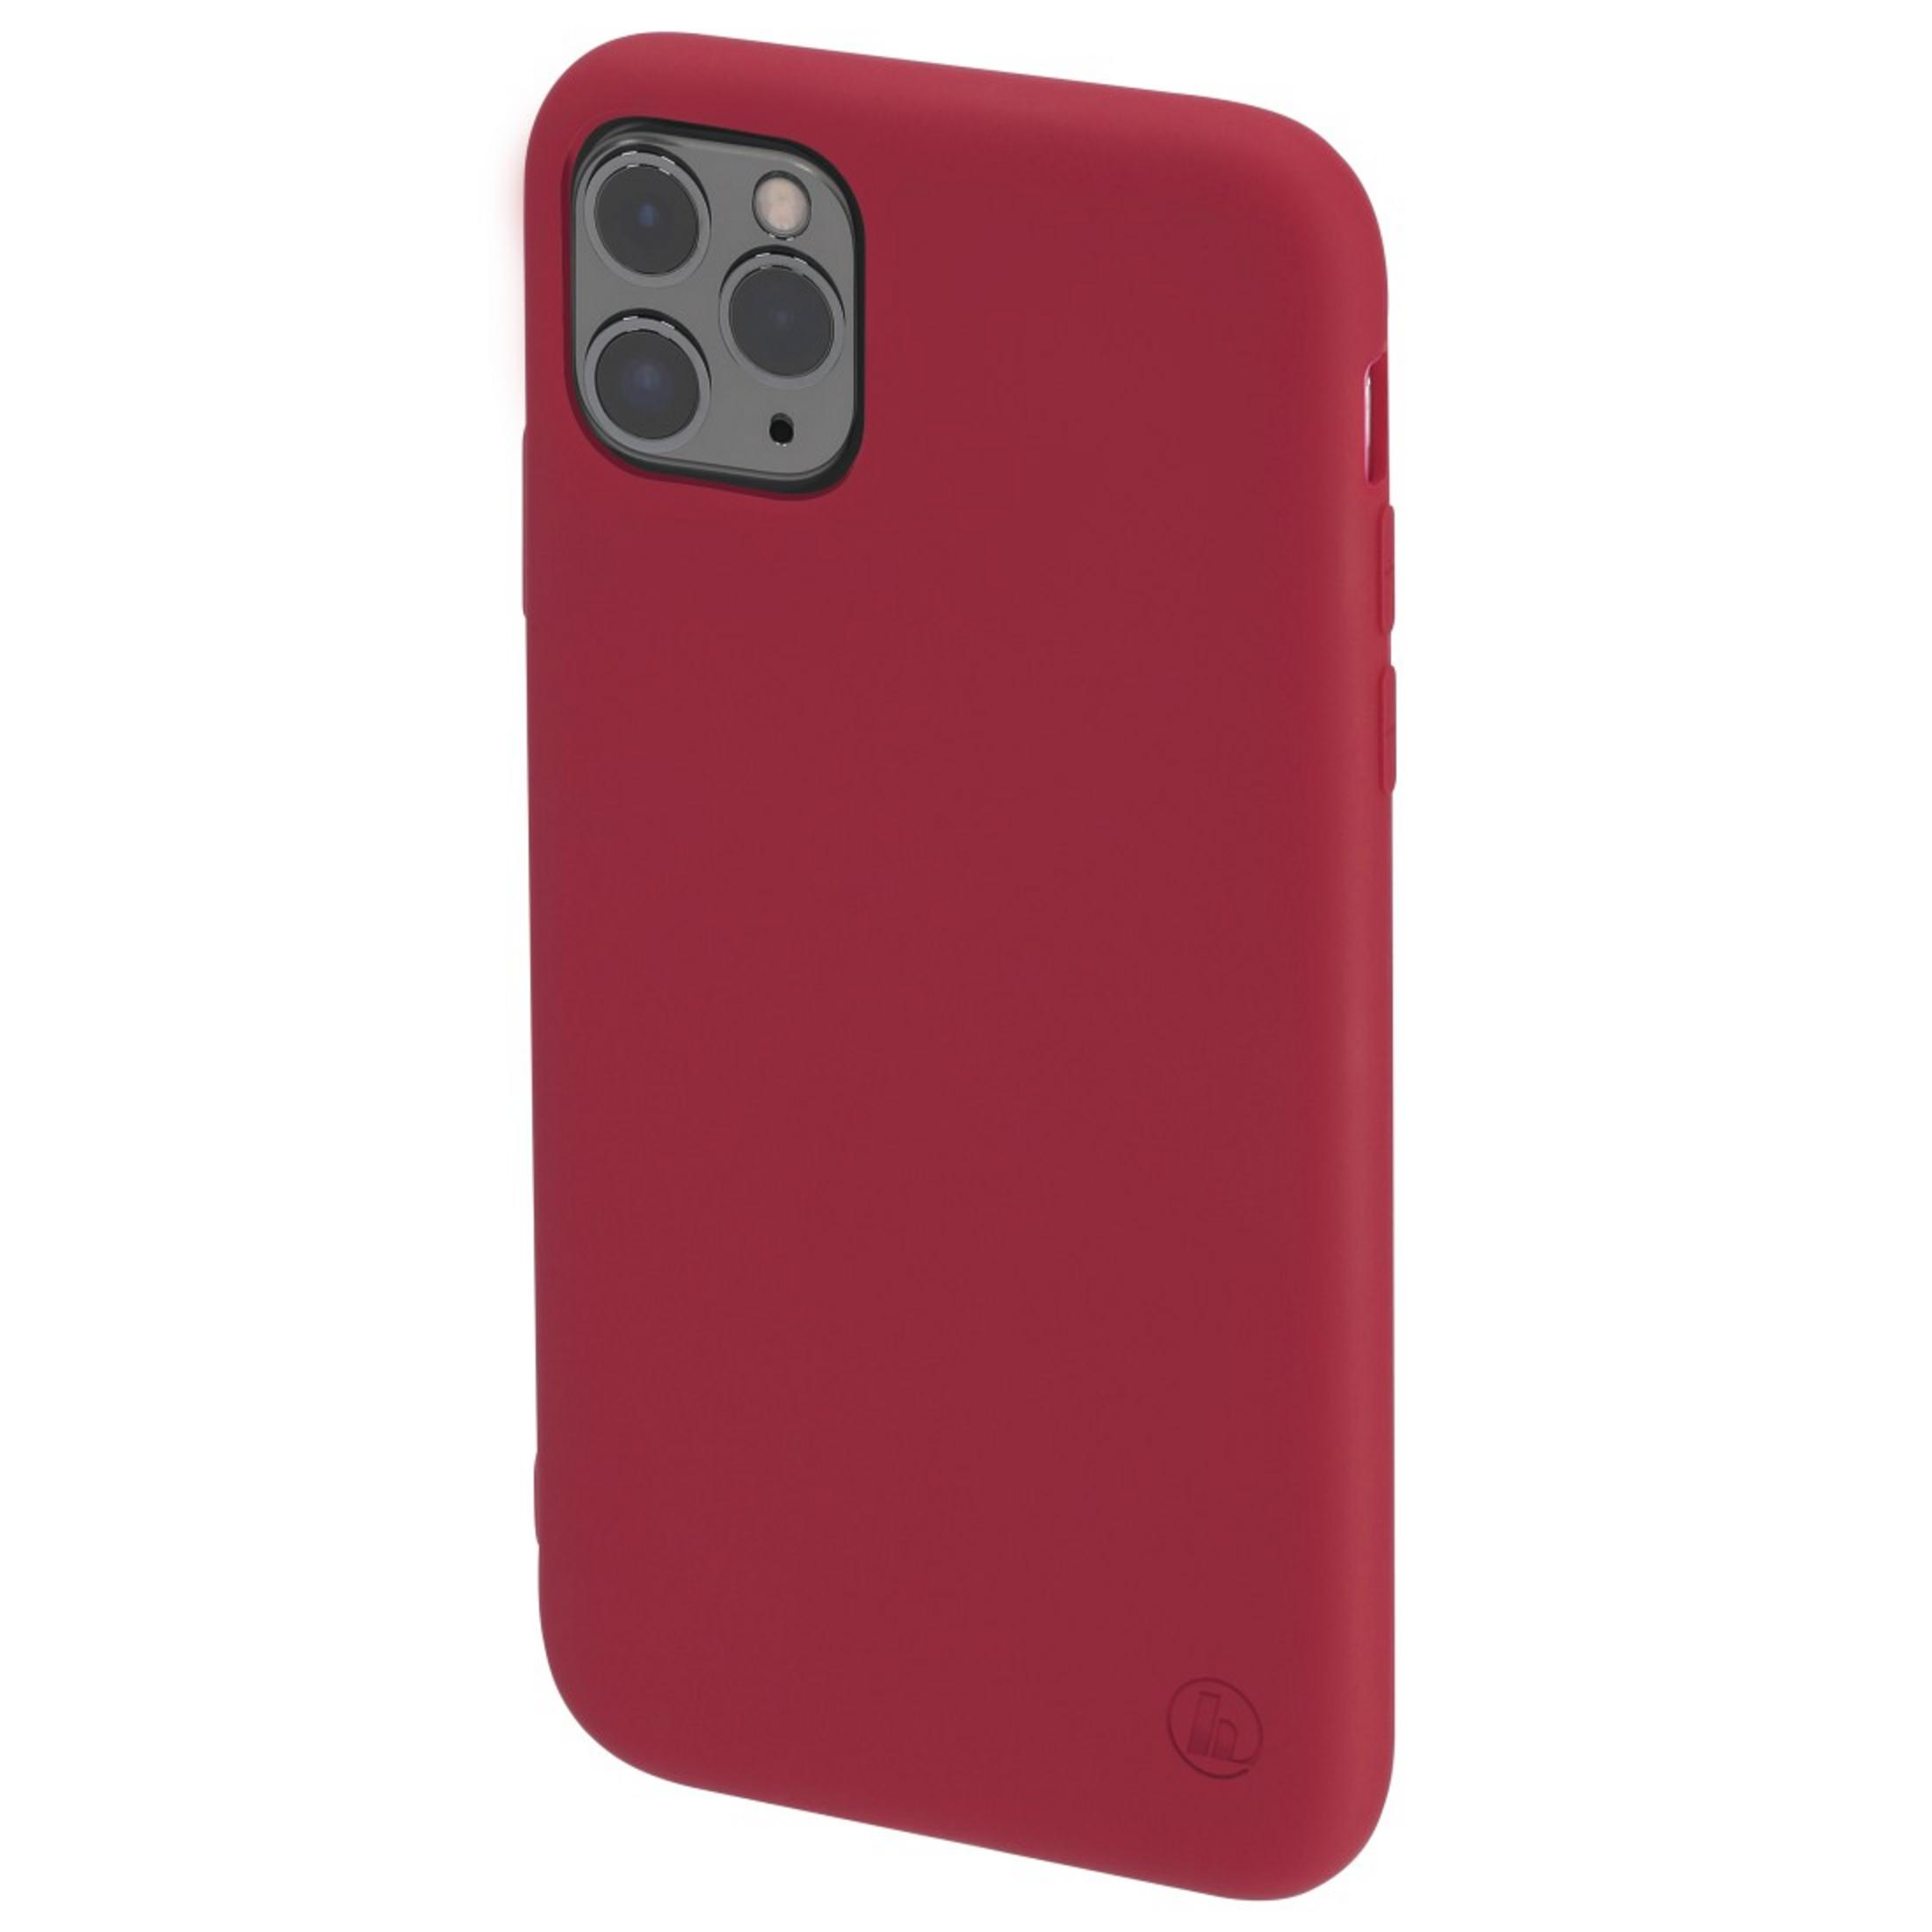 RT, 00195330 FEEL FINEST 11 11 Pro, IPH Backcover, APPLE HAMA CO PRO, Apple, Rot iPhone